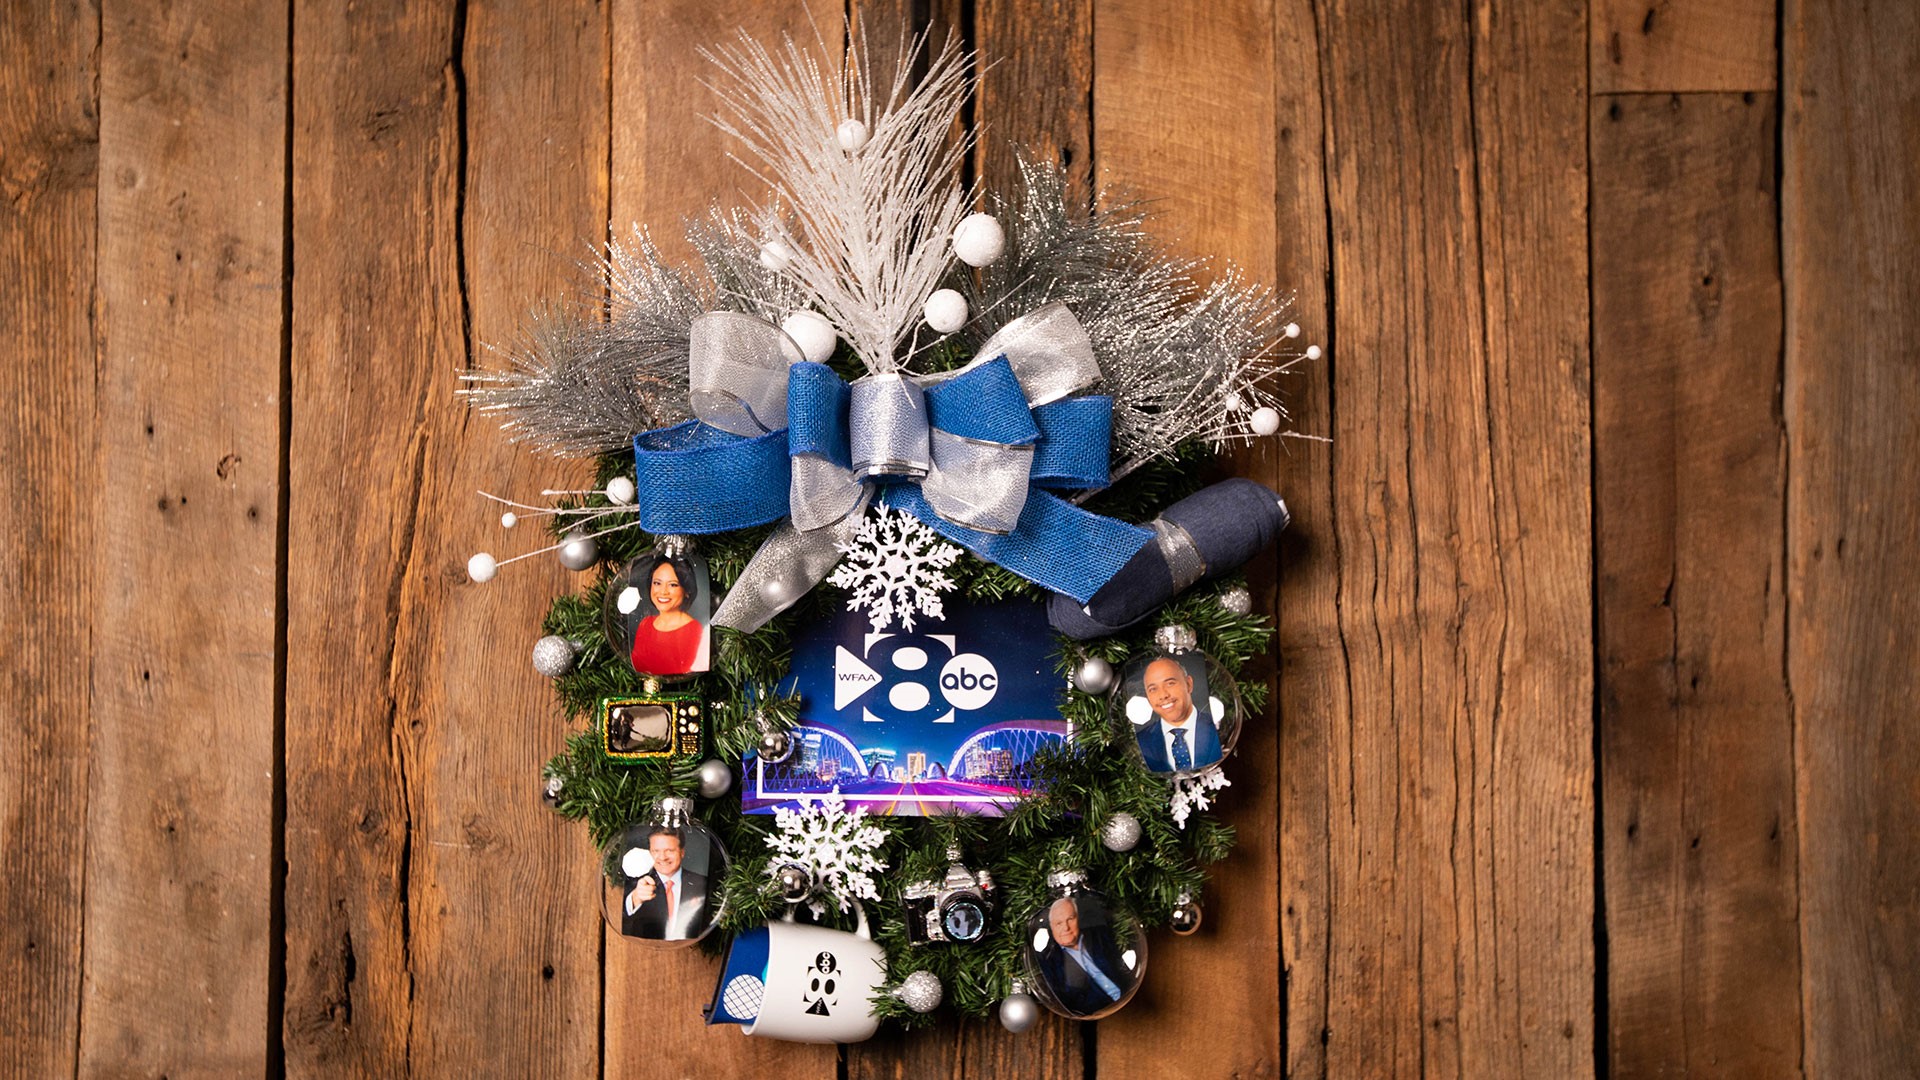 Bid on one-of-a-kind-wreaths to benefit WFAA's Santa's Helpers and North Texas children.